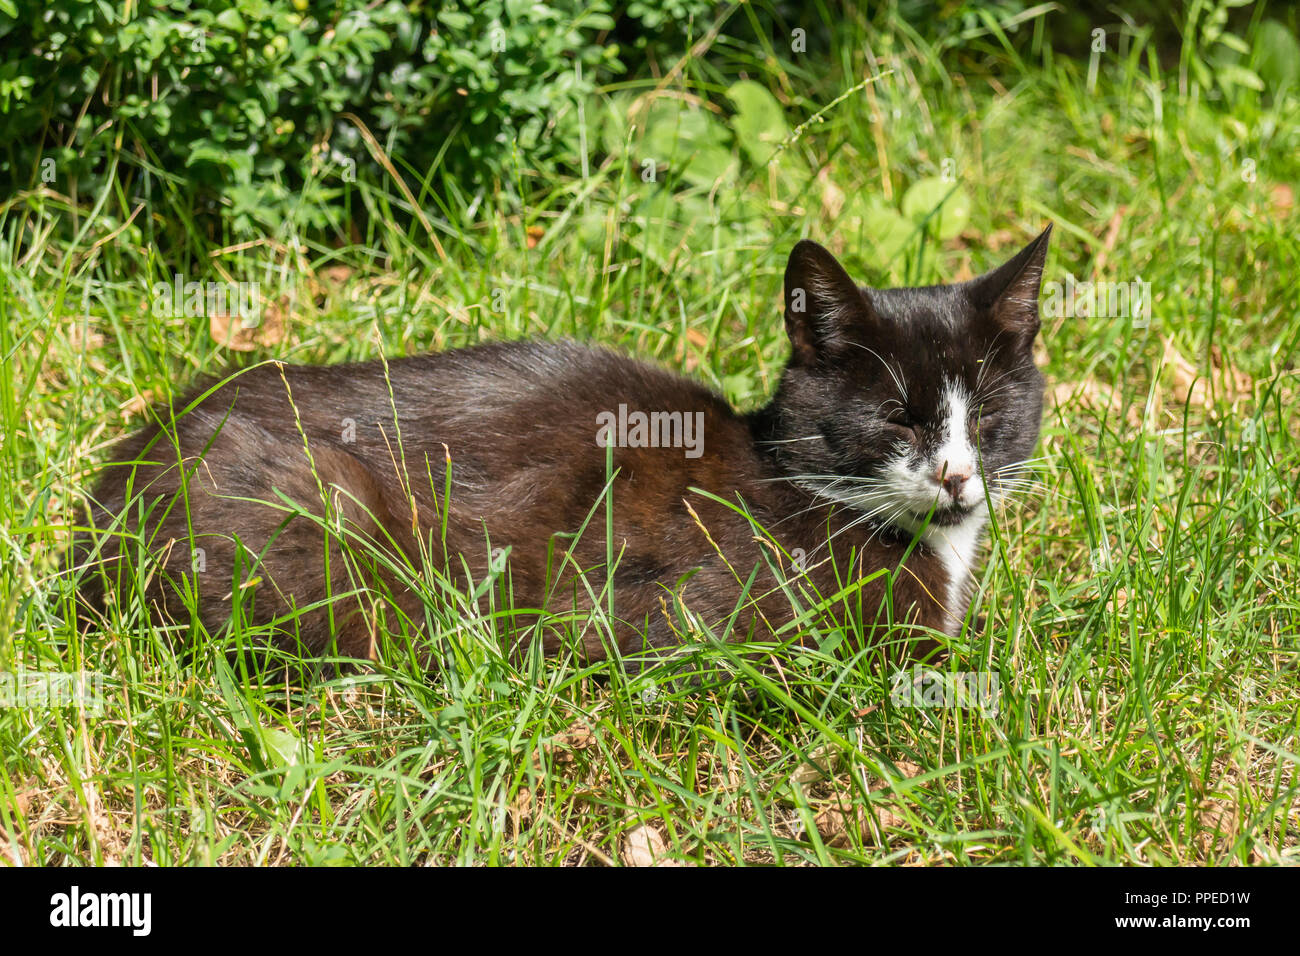 Black and white cat lying in green grass eyes closed sleeping Stock Photo